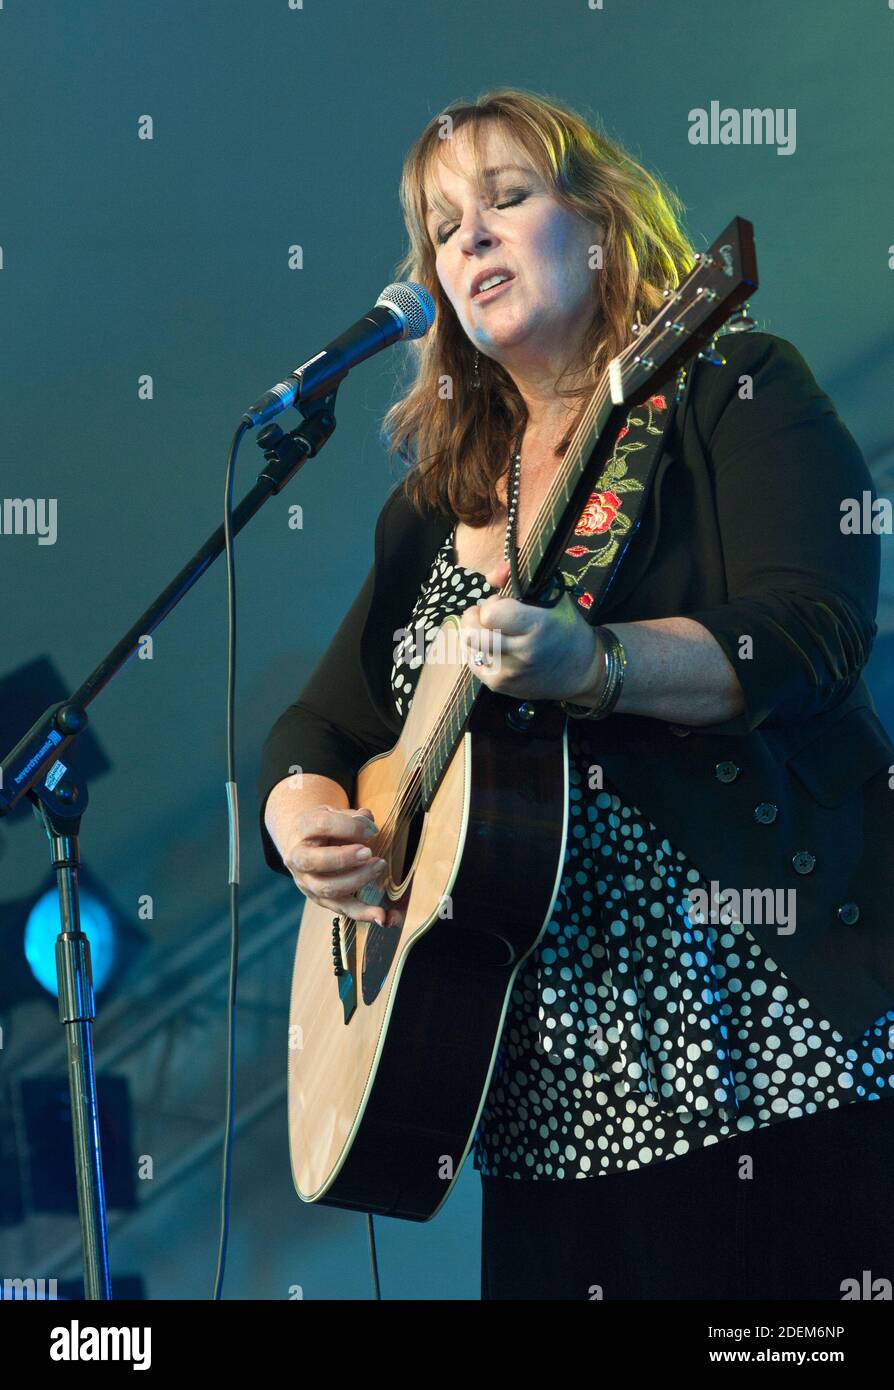 American singer/songwriter, Gretchen Peters performing at the Cornbury festival, UK in 2012 Stock Photo